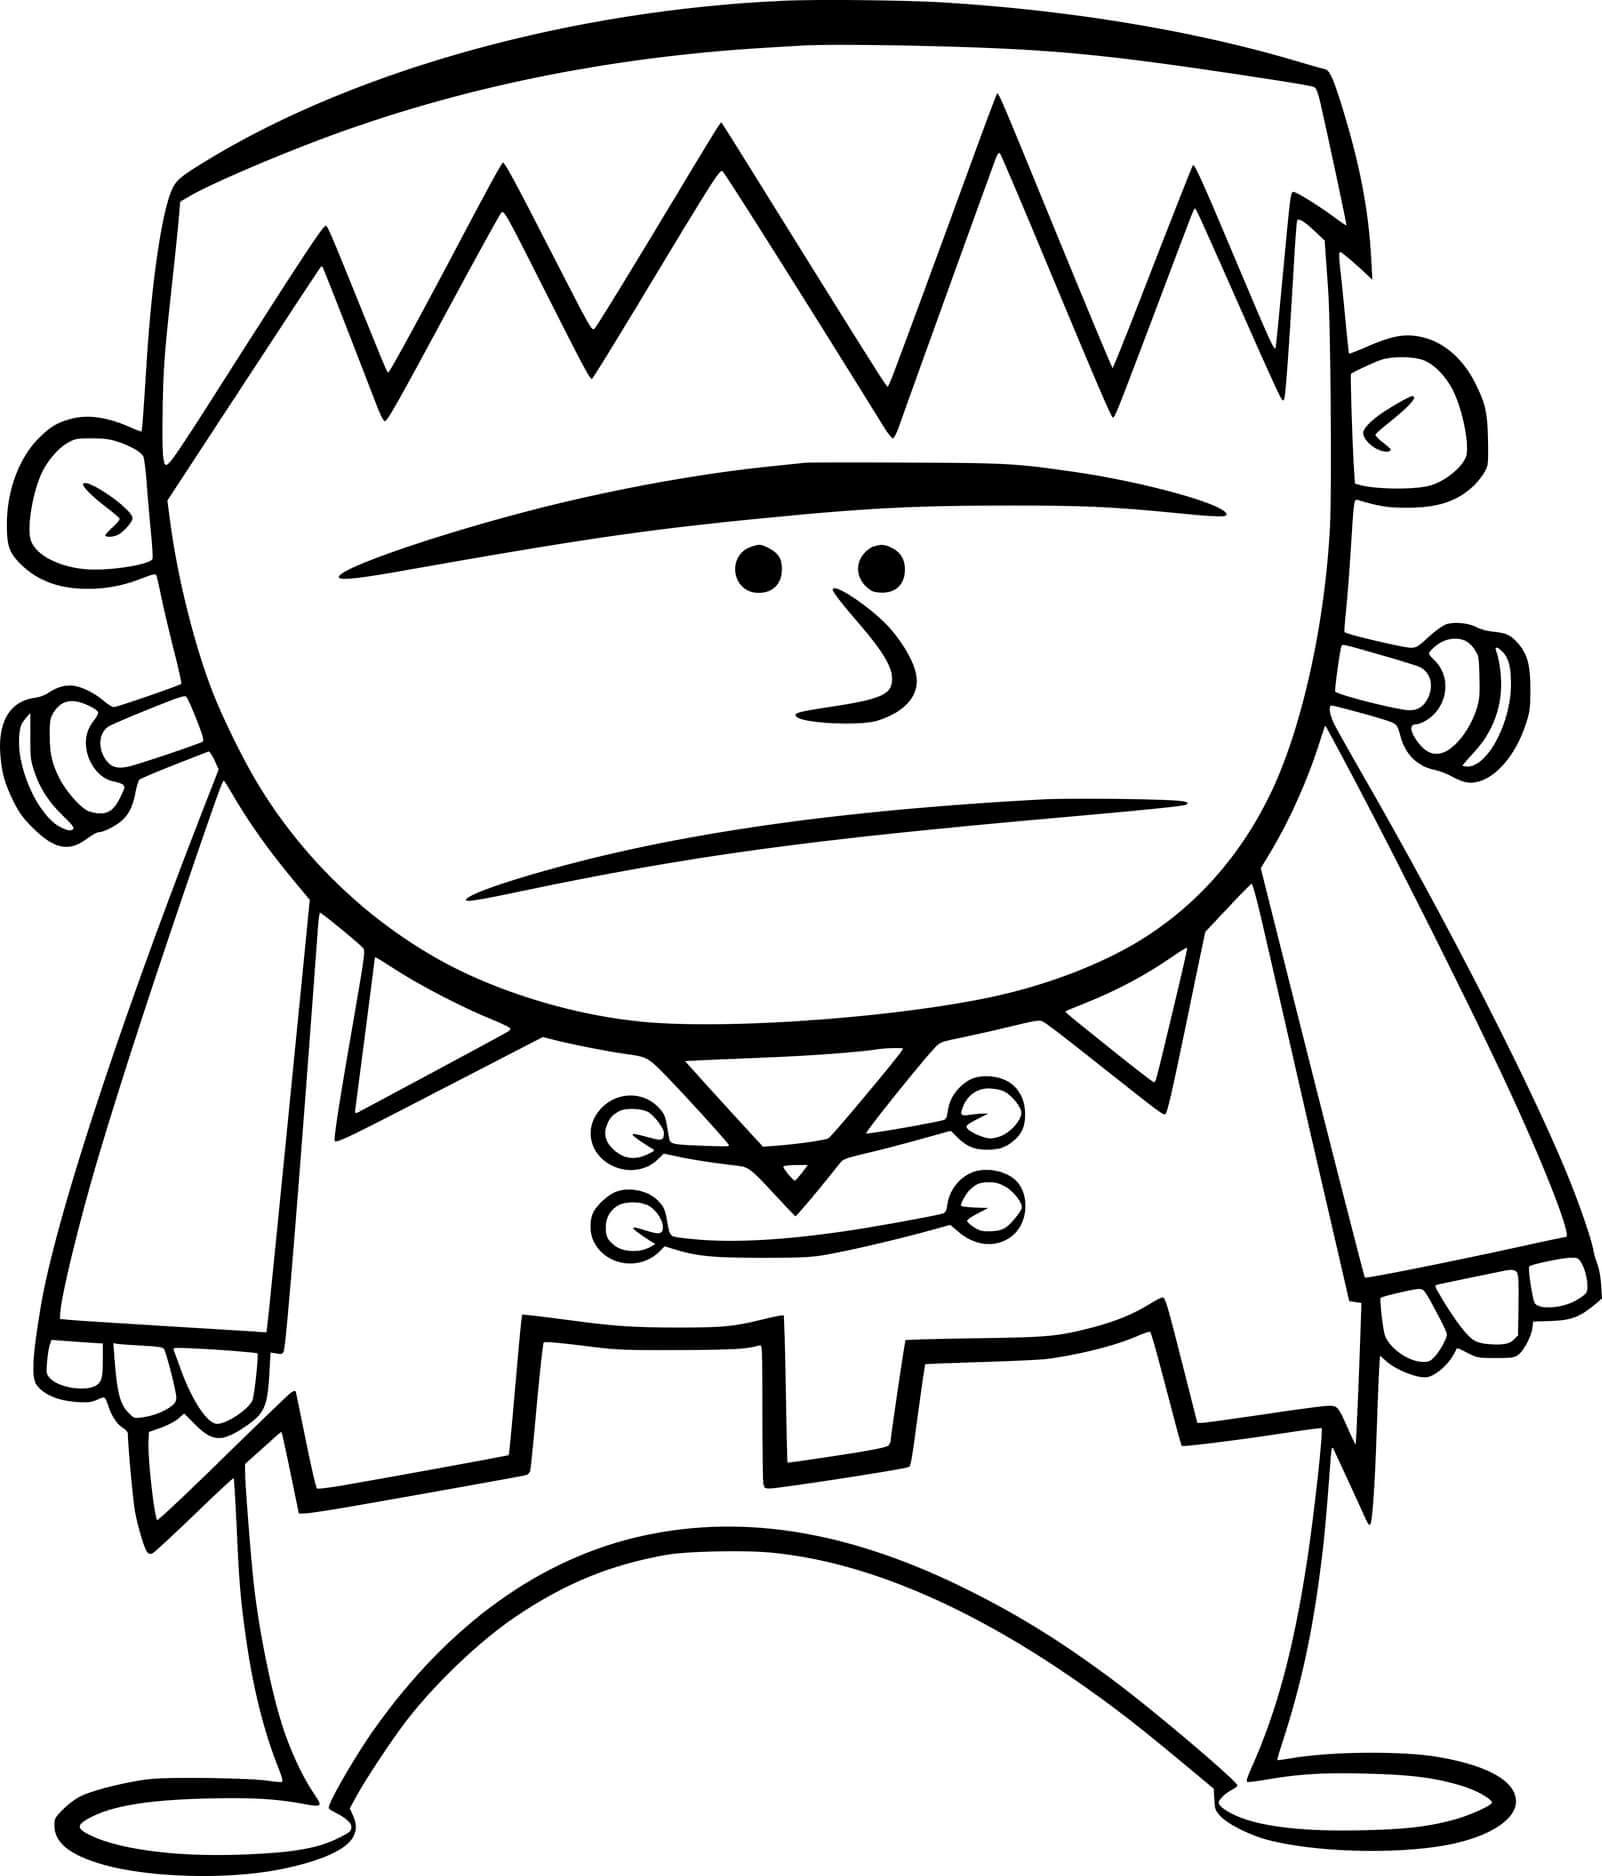 Easy Cartoon Frankenstein Coloring Pages - Coloring Cool